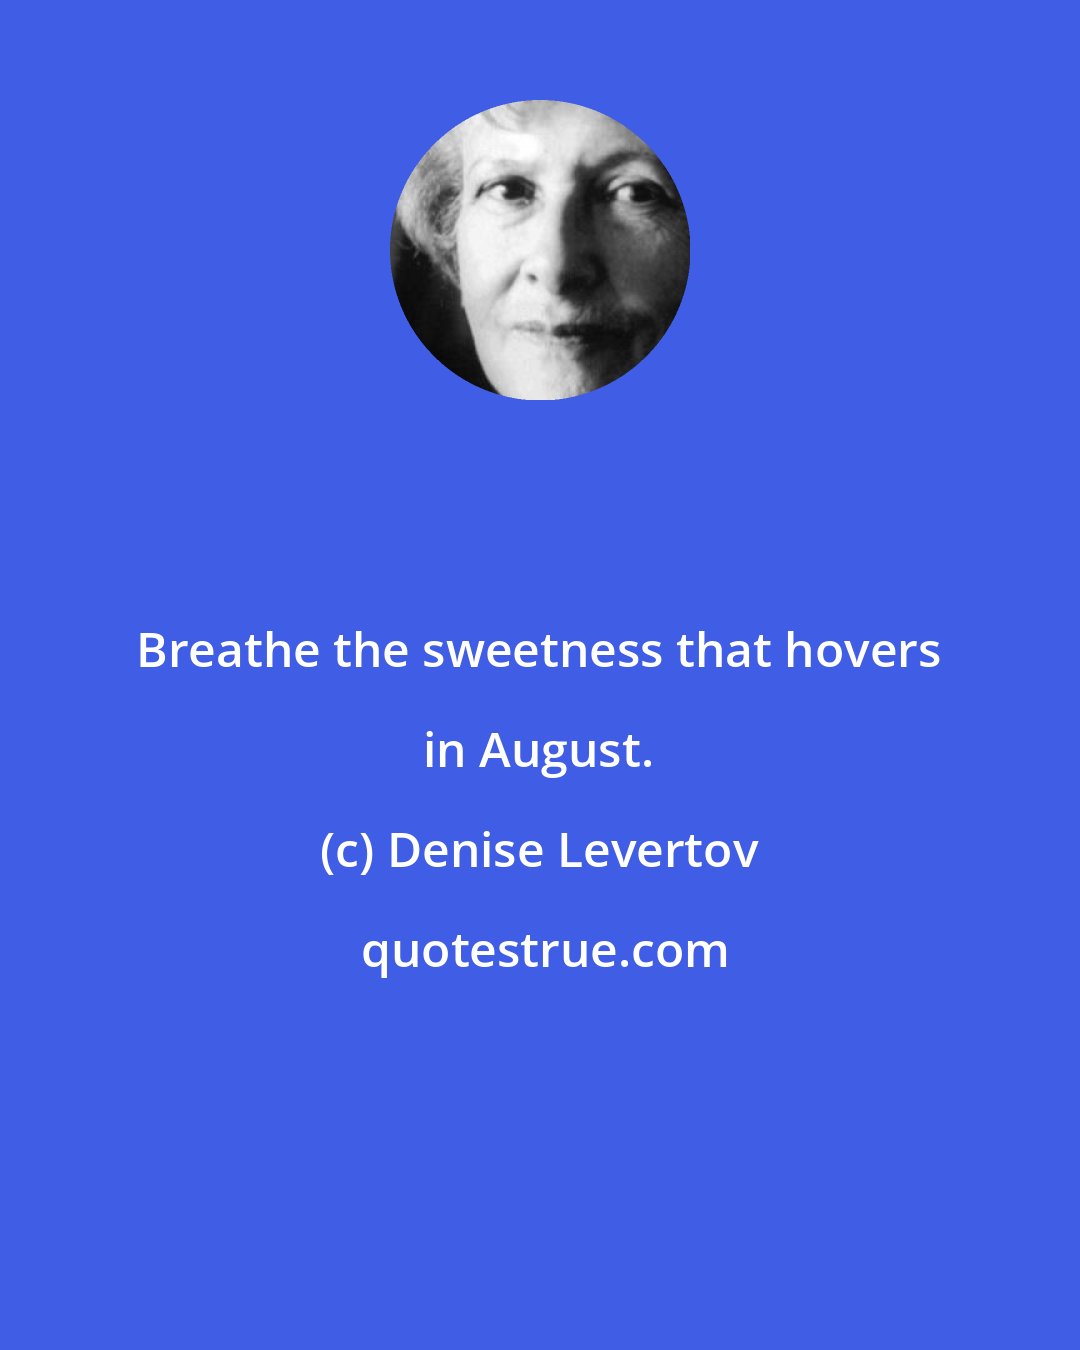 Denise Levertov: Breathe the sweetness that hovers in August.